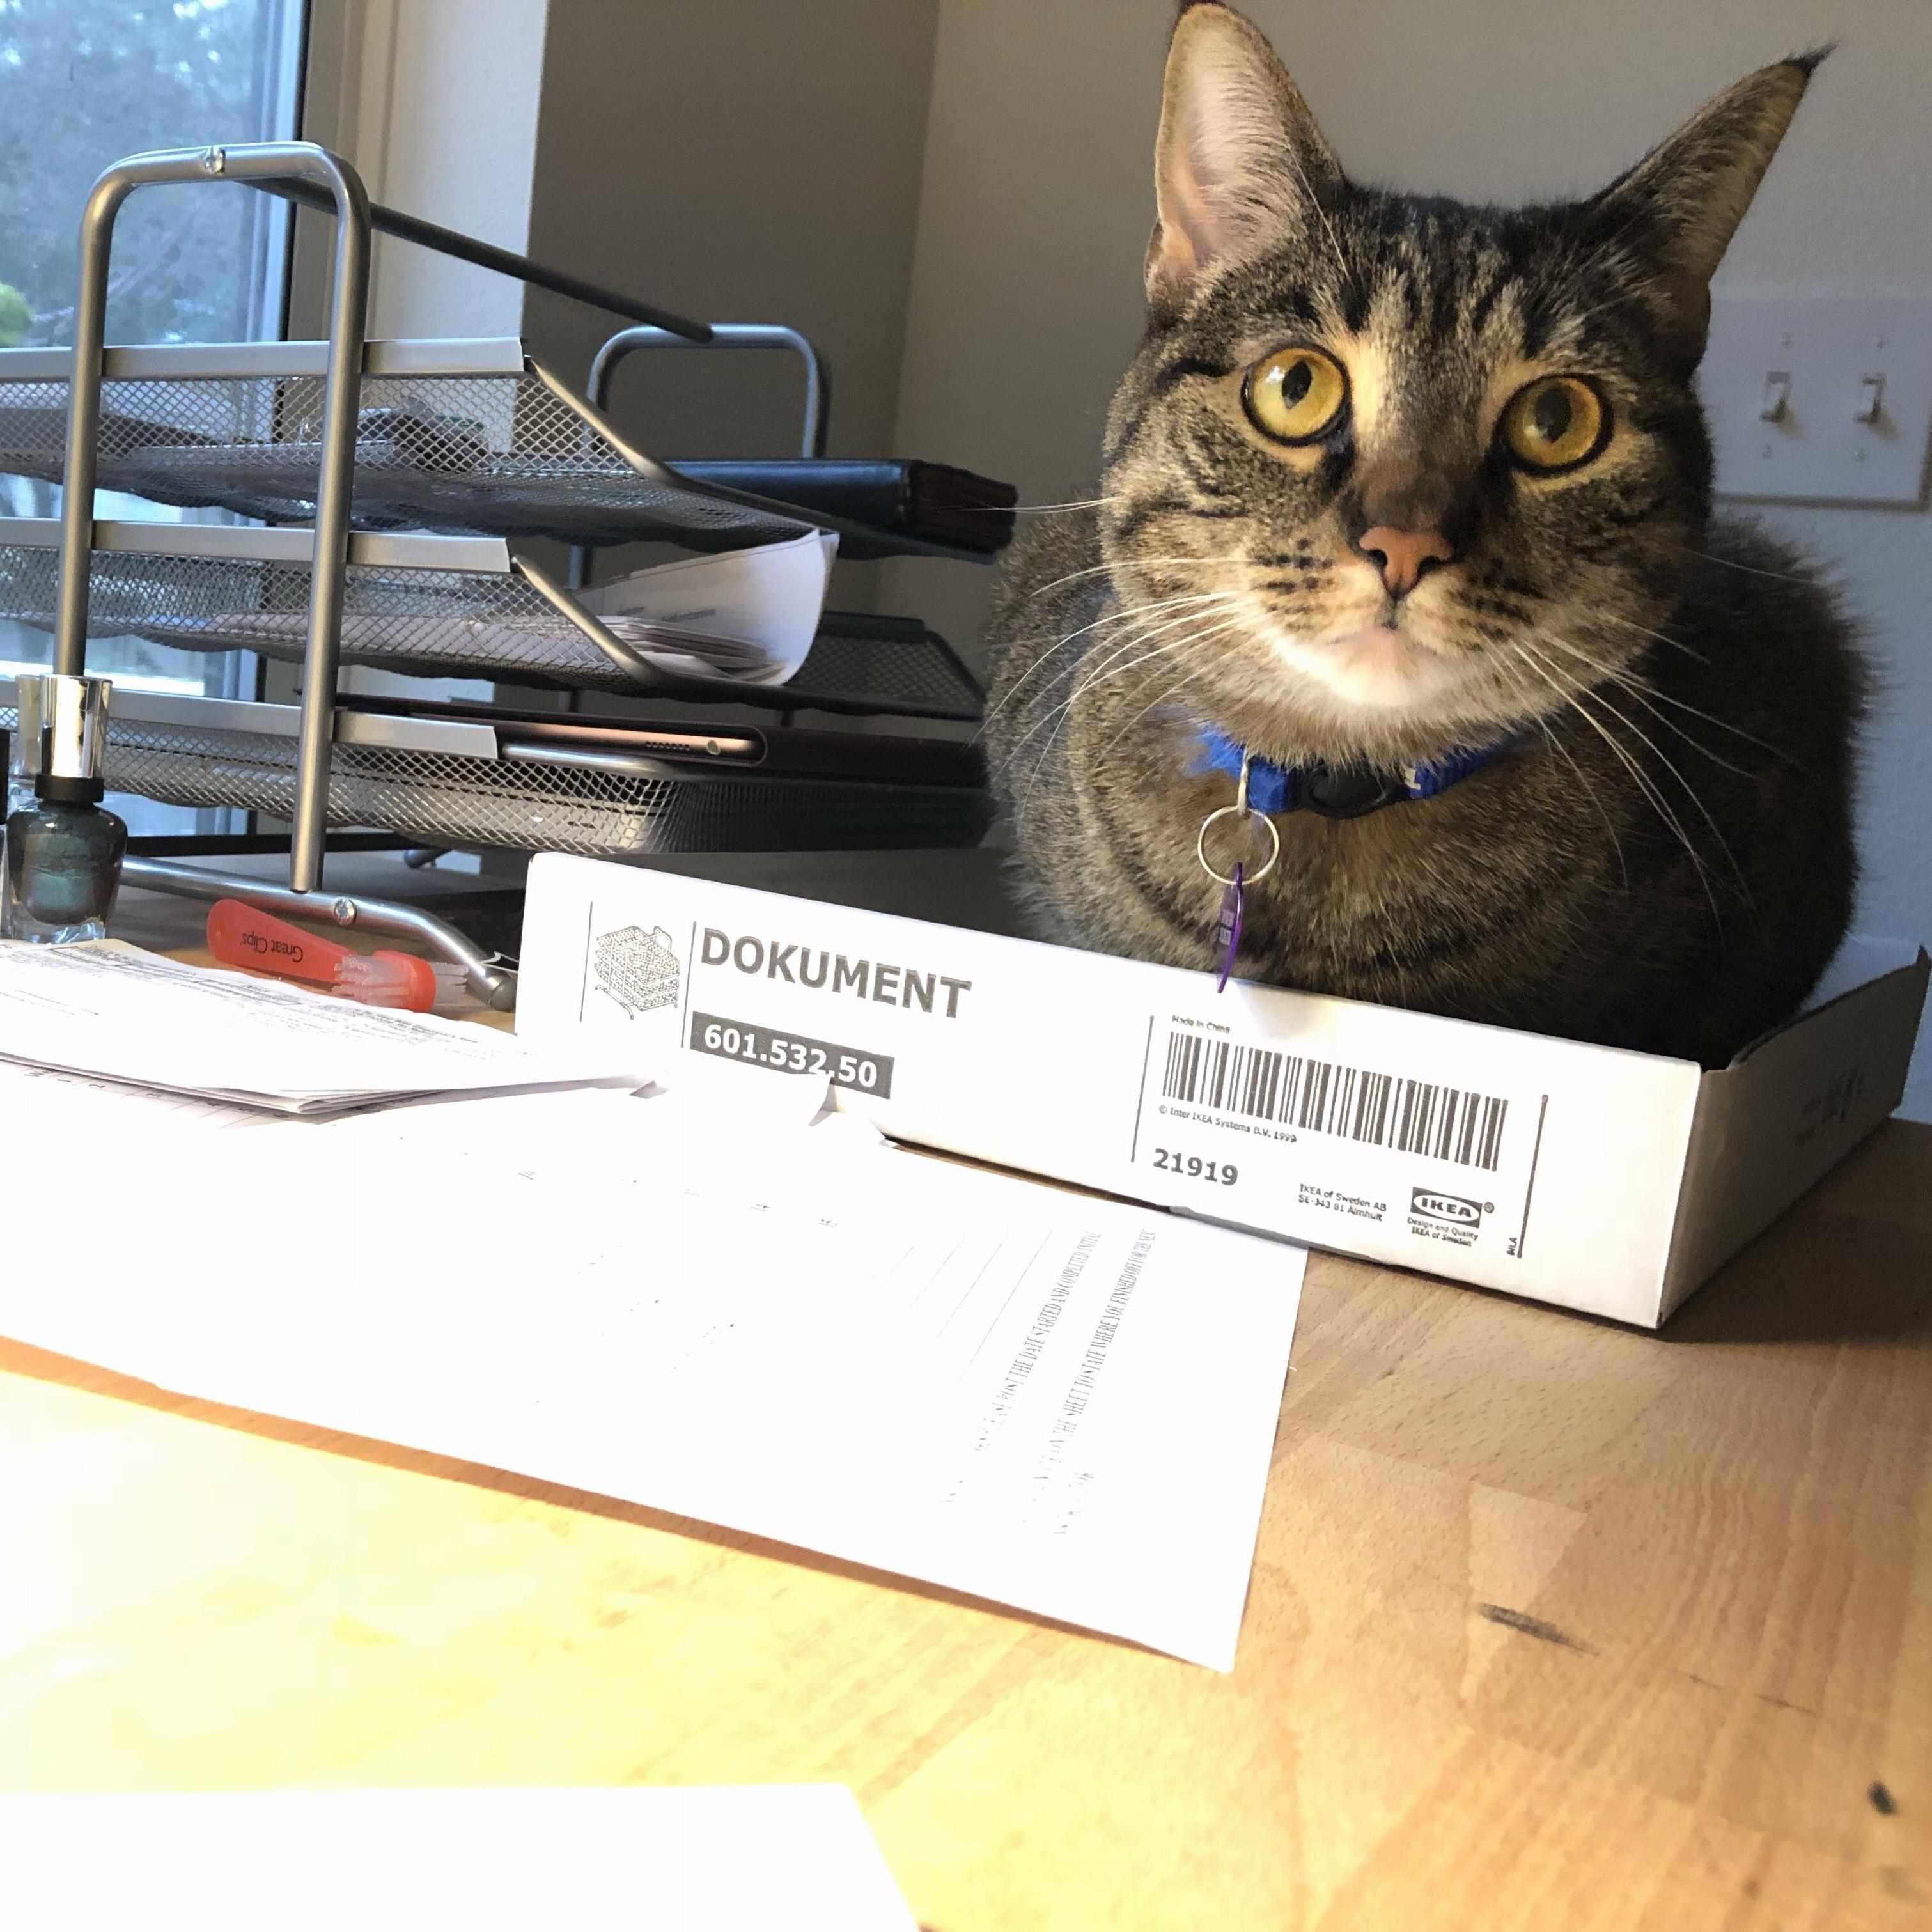 Apparently ikeas desk organizers come with a bonus tray for your cat